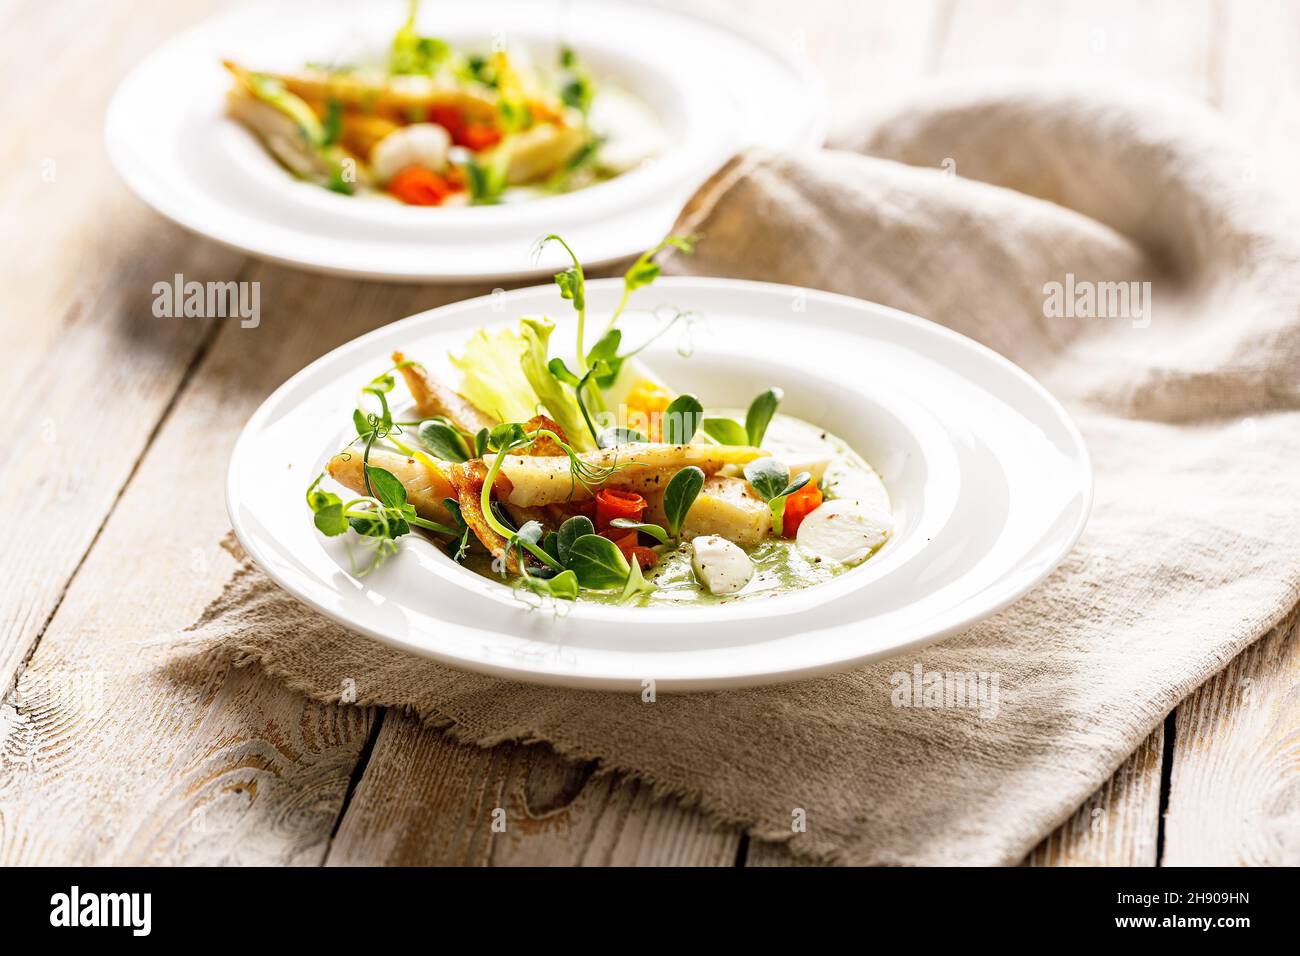 Gourmet fish salad. Pangasius dori fillet, vegetables, avocado pate, mozzarella and fresh herbs. Restaurant serving. Chef's dish. Healthy and tasty fo Stock Photo